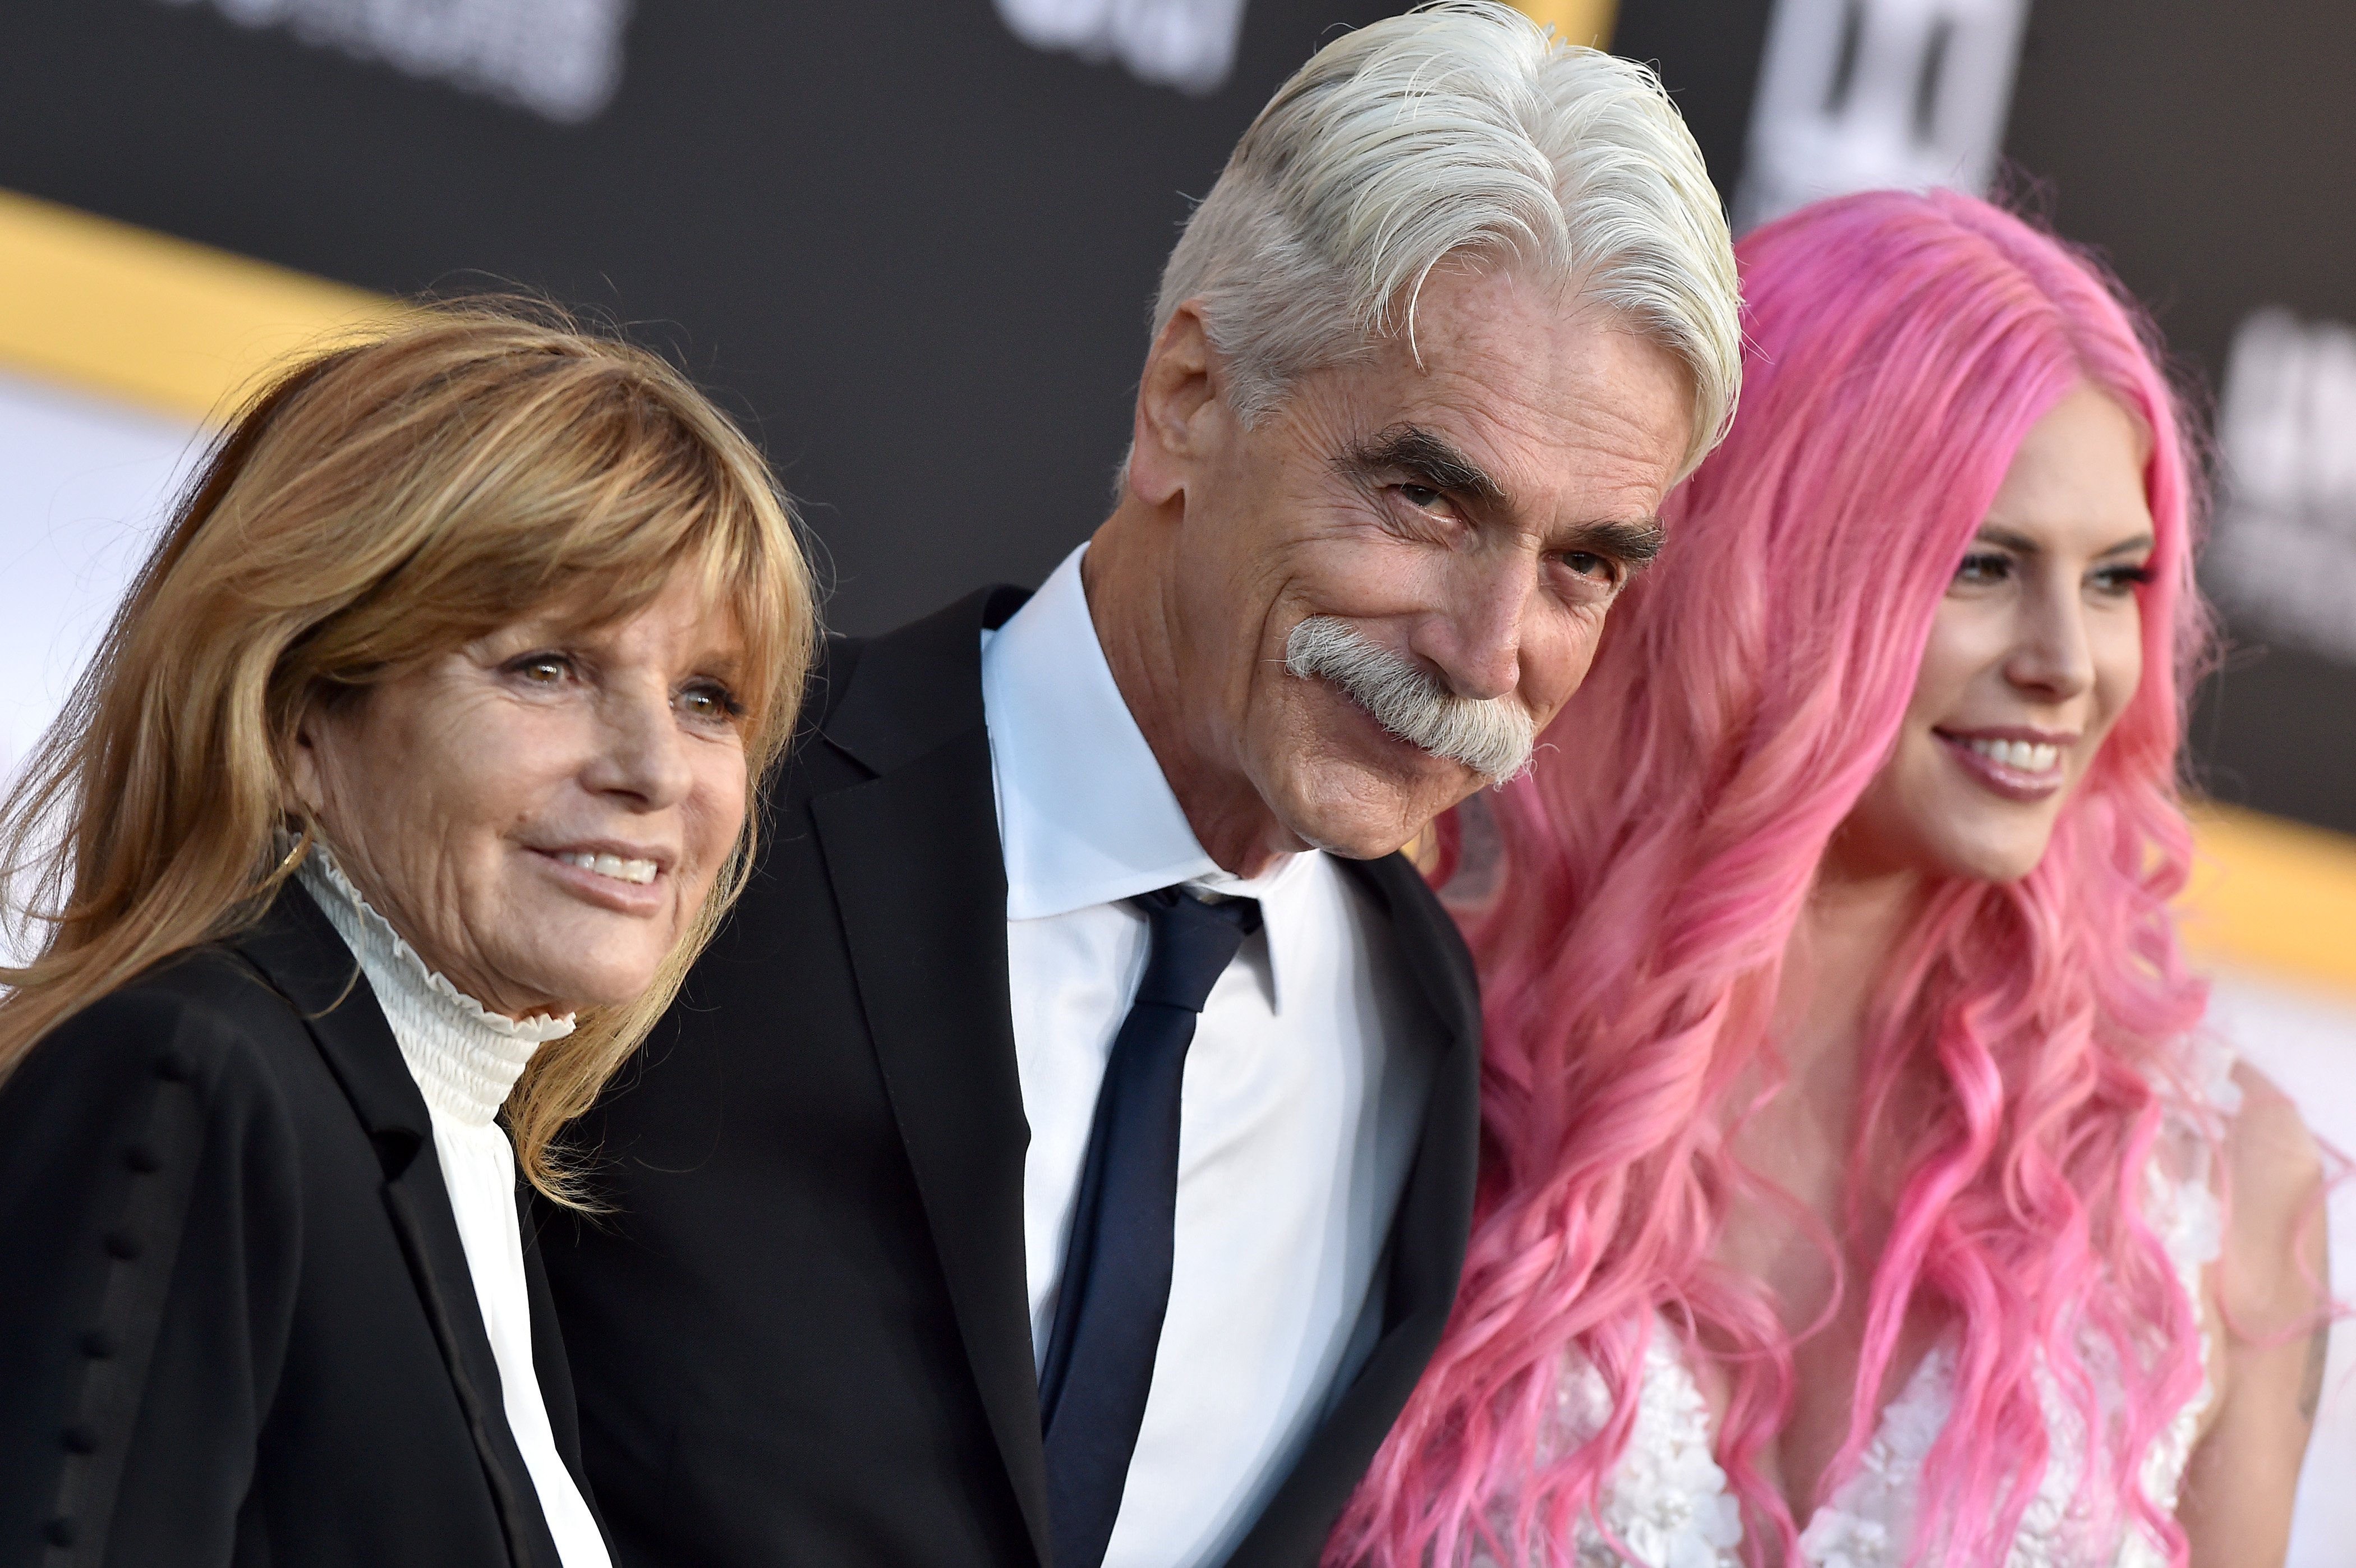 Sam Elliott, wife Katharine Ross, and daughter Cleo Rose Elliott attend the premiere of Warner Bros. Pictures' 'A Star Is Born' at The Shrine Auditorium on September 24, 2018, in Los Angeles, California. | Source: Getty Images